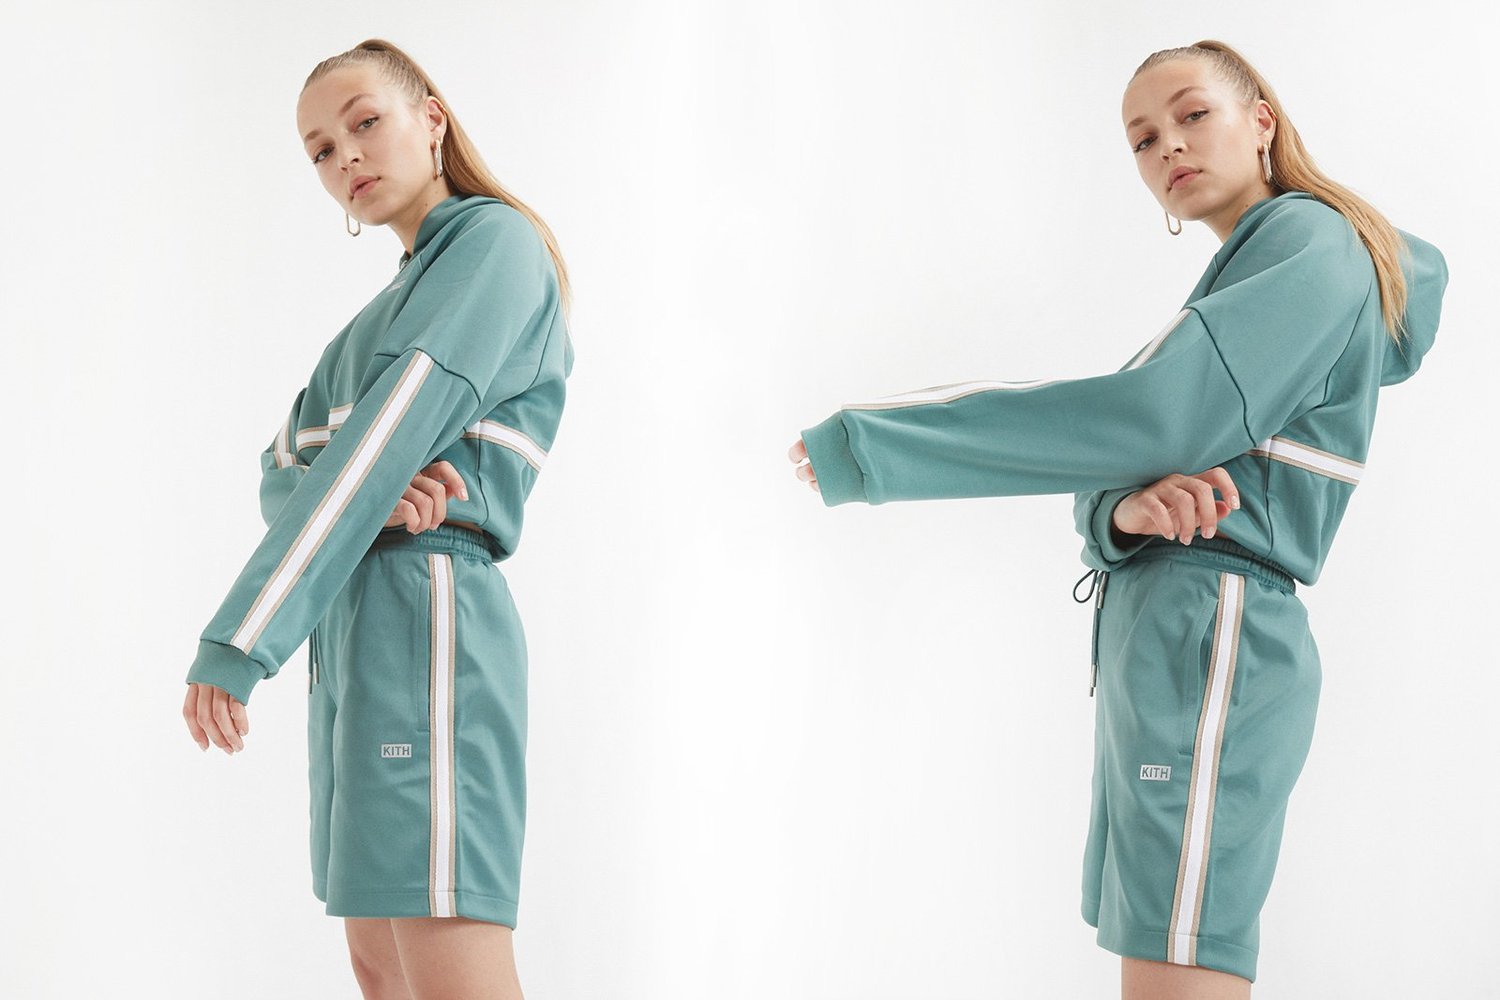 Here's the Kith x Coca Cola Lookbook We've Been Waiting For — CNK Daily  (ChicksNKicks)